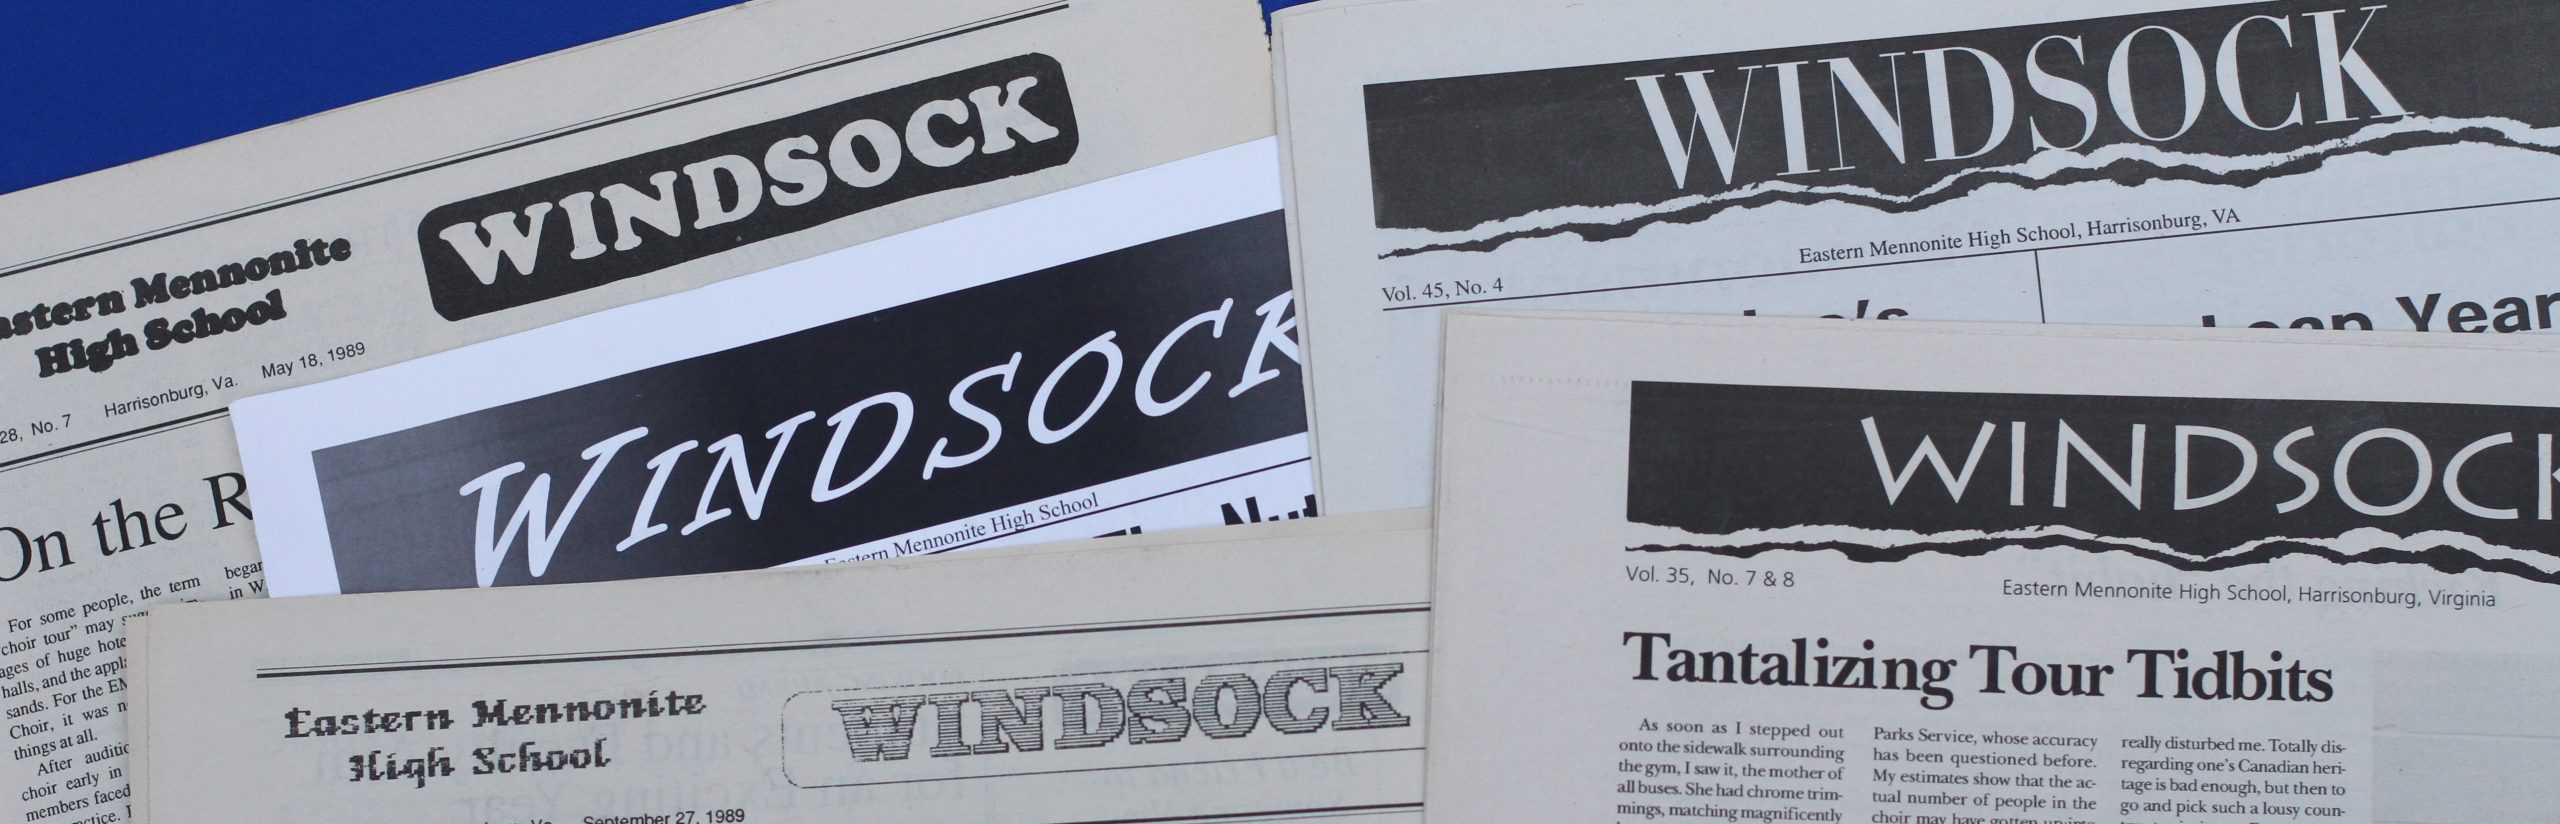 Windsock, the student newspaper, is posted on the school's website  starting in 2021. Past issues starting from 1959 can be found online in the special collections section of Eastern Mennonite University at emu.edu/library